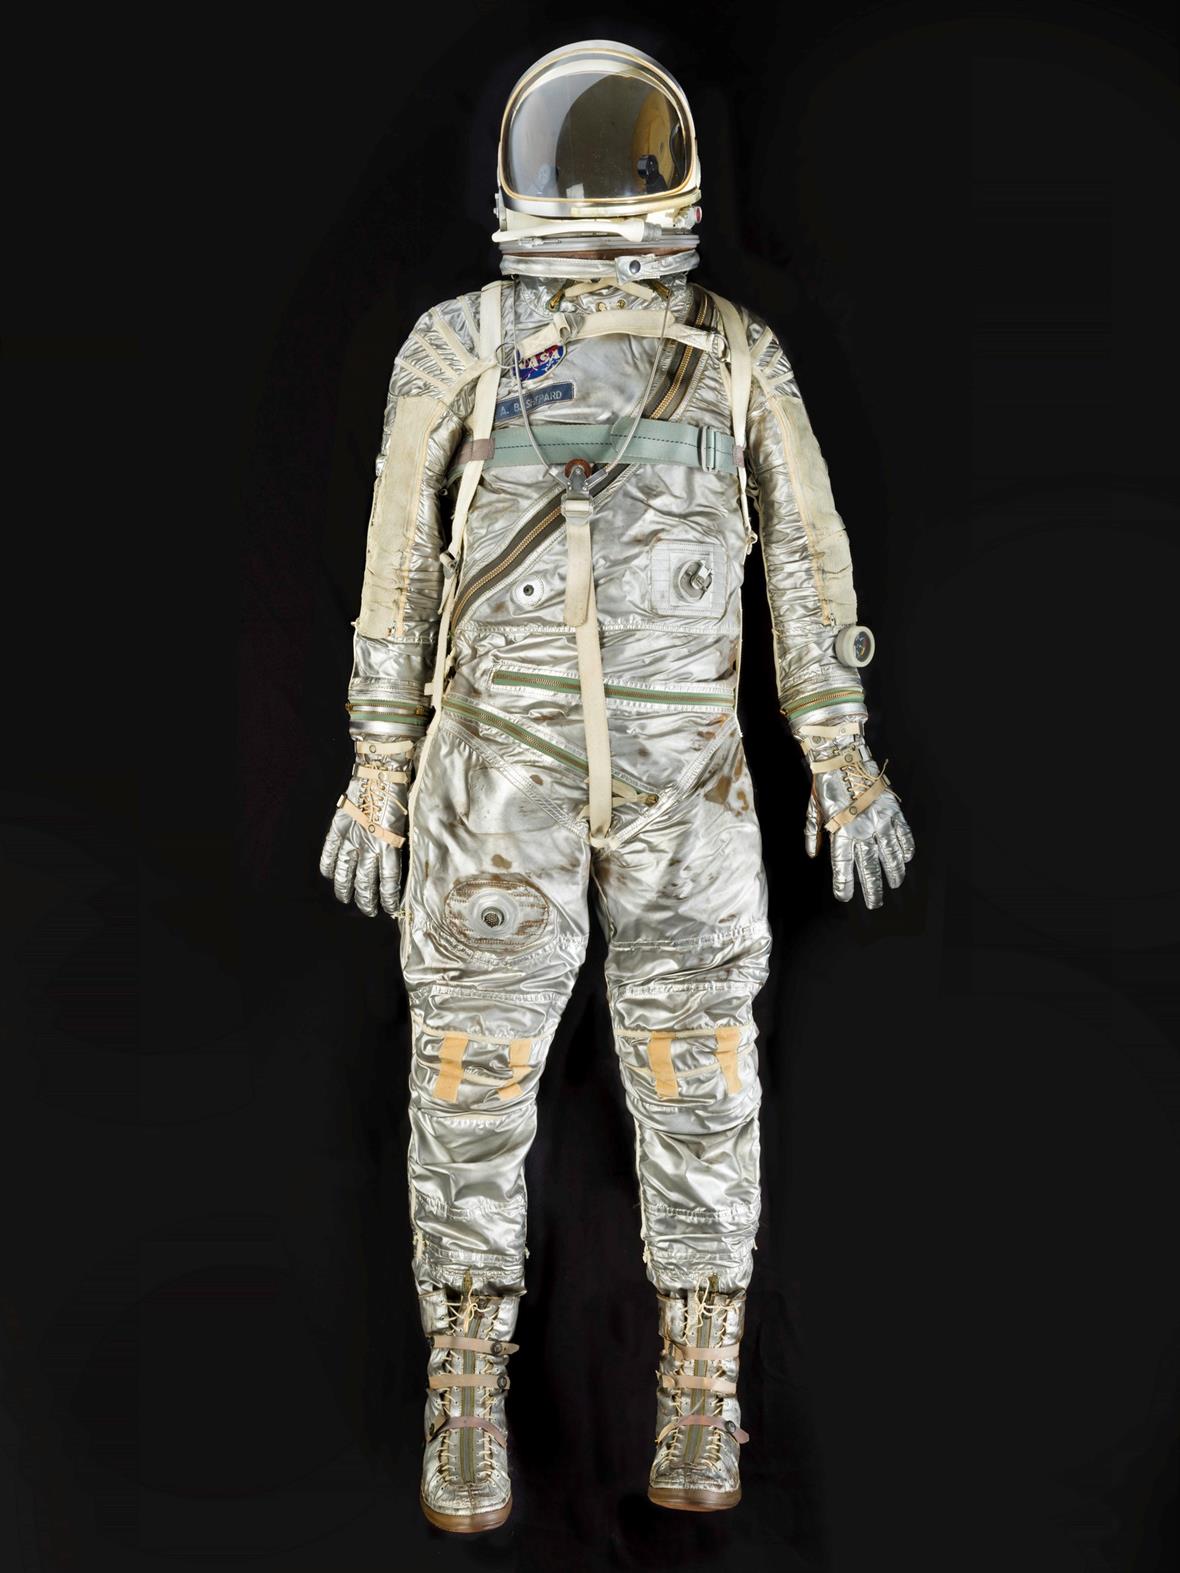 An image of the full spacesuit against a black background.